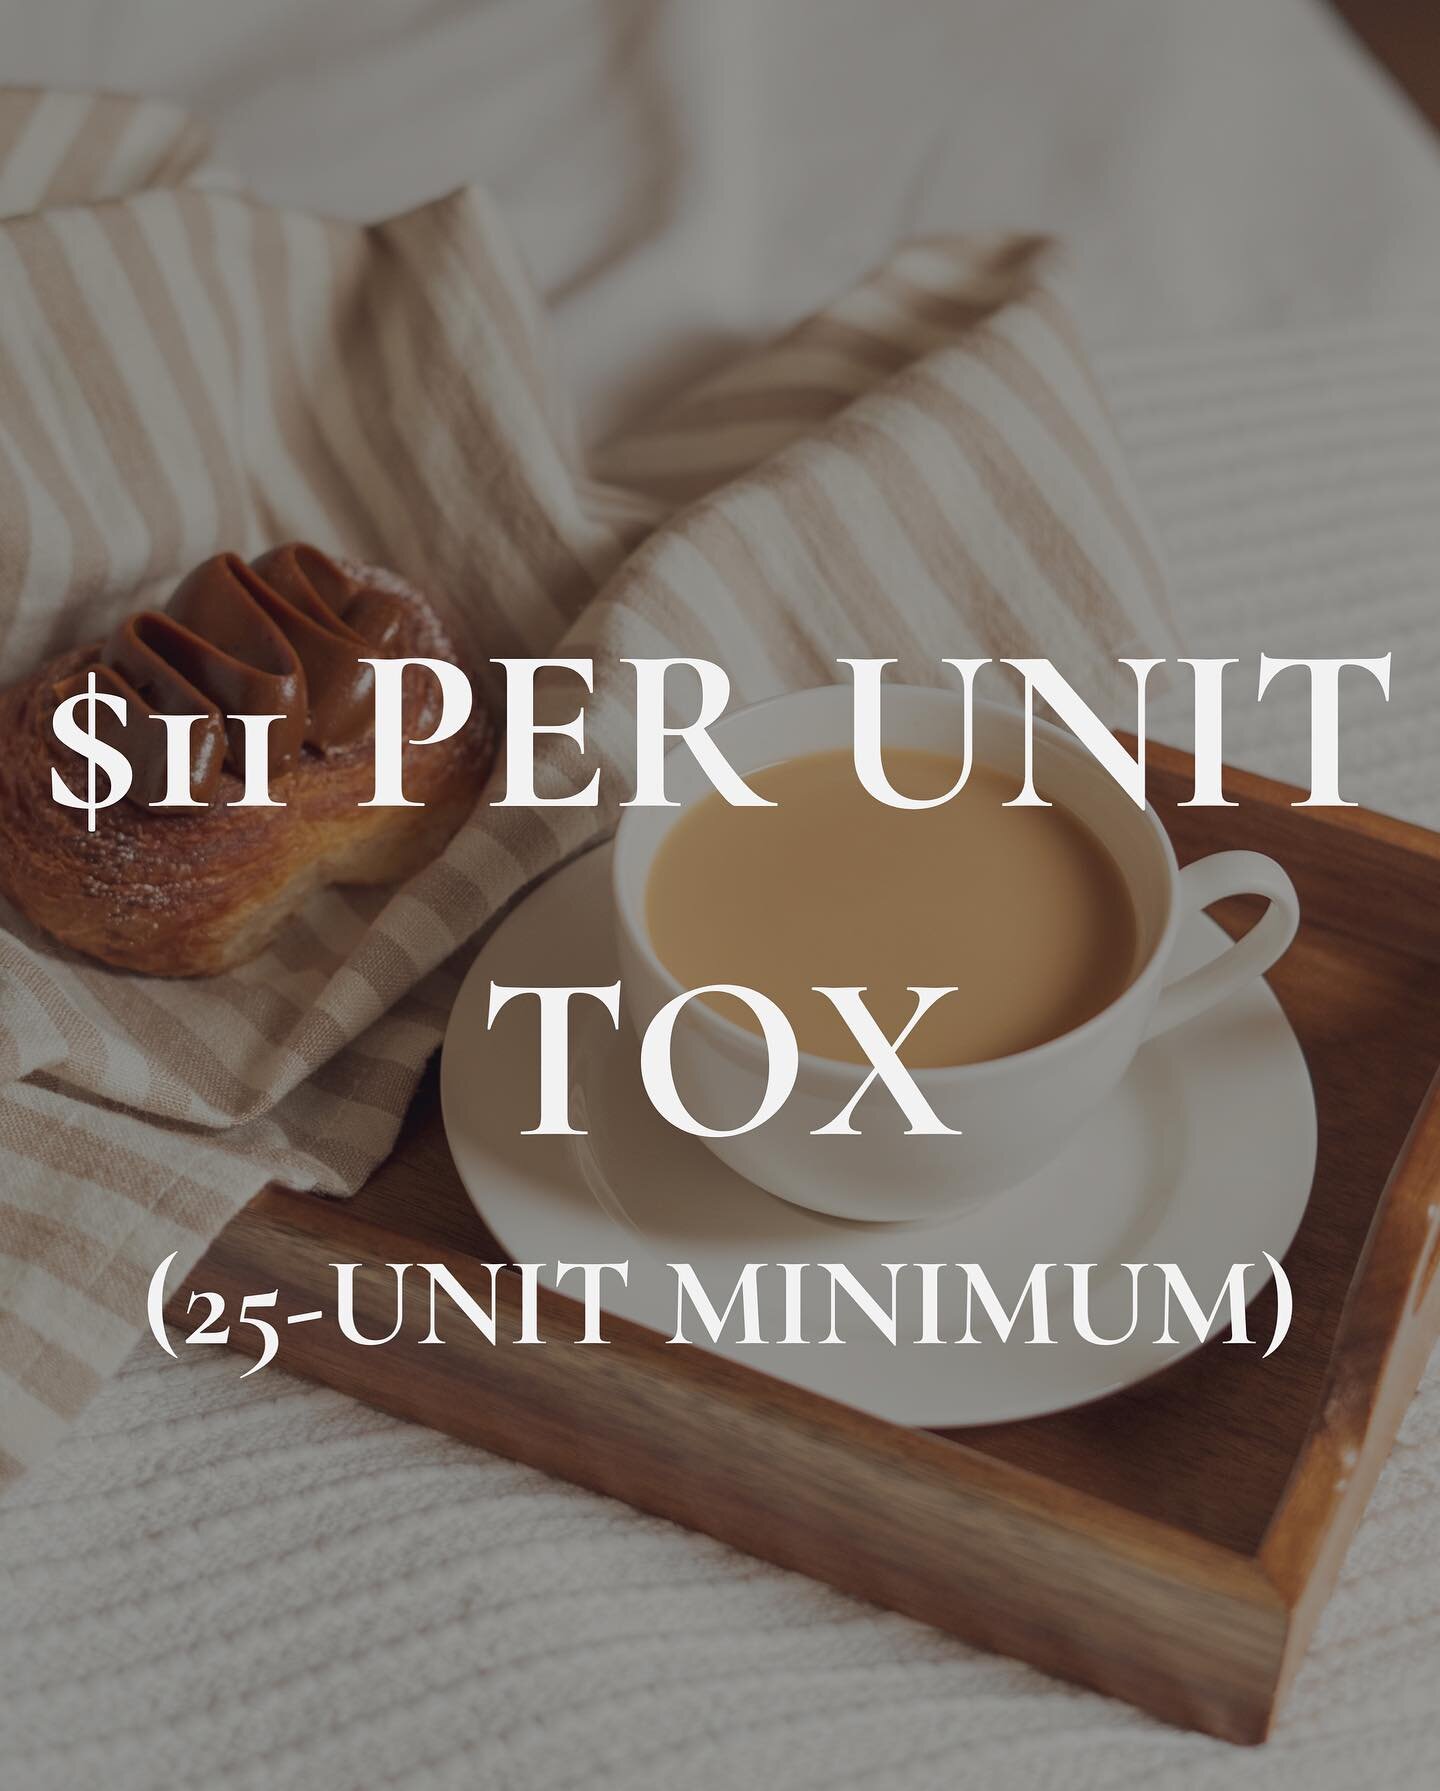 🚨 Don't Miss Out on These AMAZING Deals! 🚨

Get ready to upgrade your beauty game with our fantastic now to  November specials! 🌟✨

🌼 Say hello to a refreshed and rejuvenated look with our $11 per unit Tox offer! That's right, just $11/unit with 